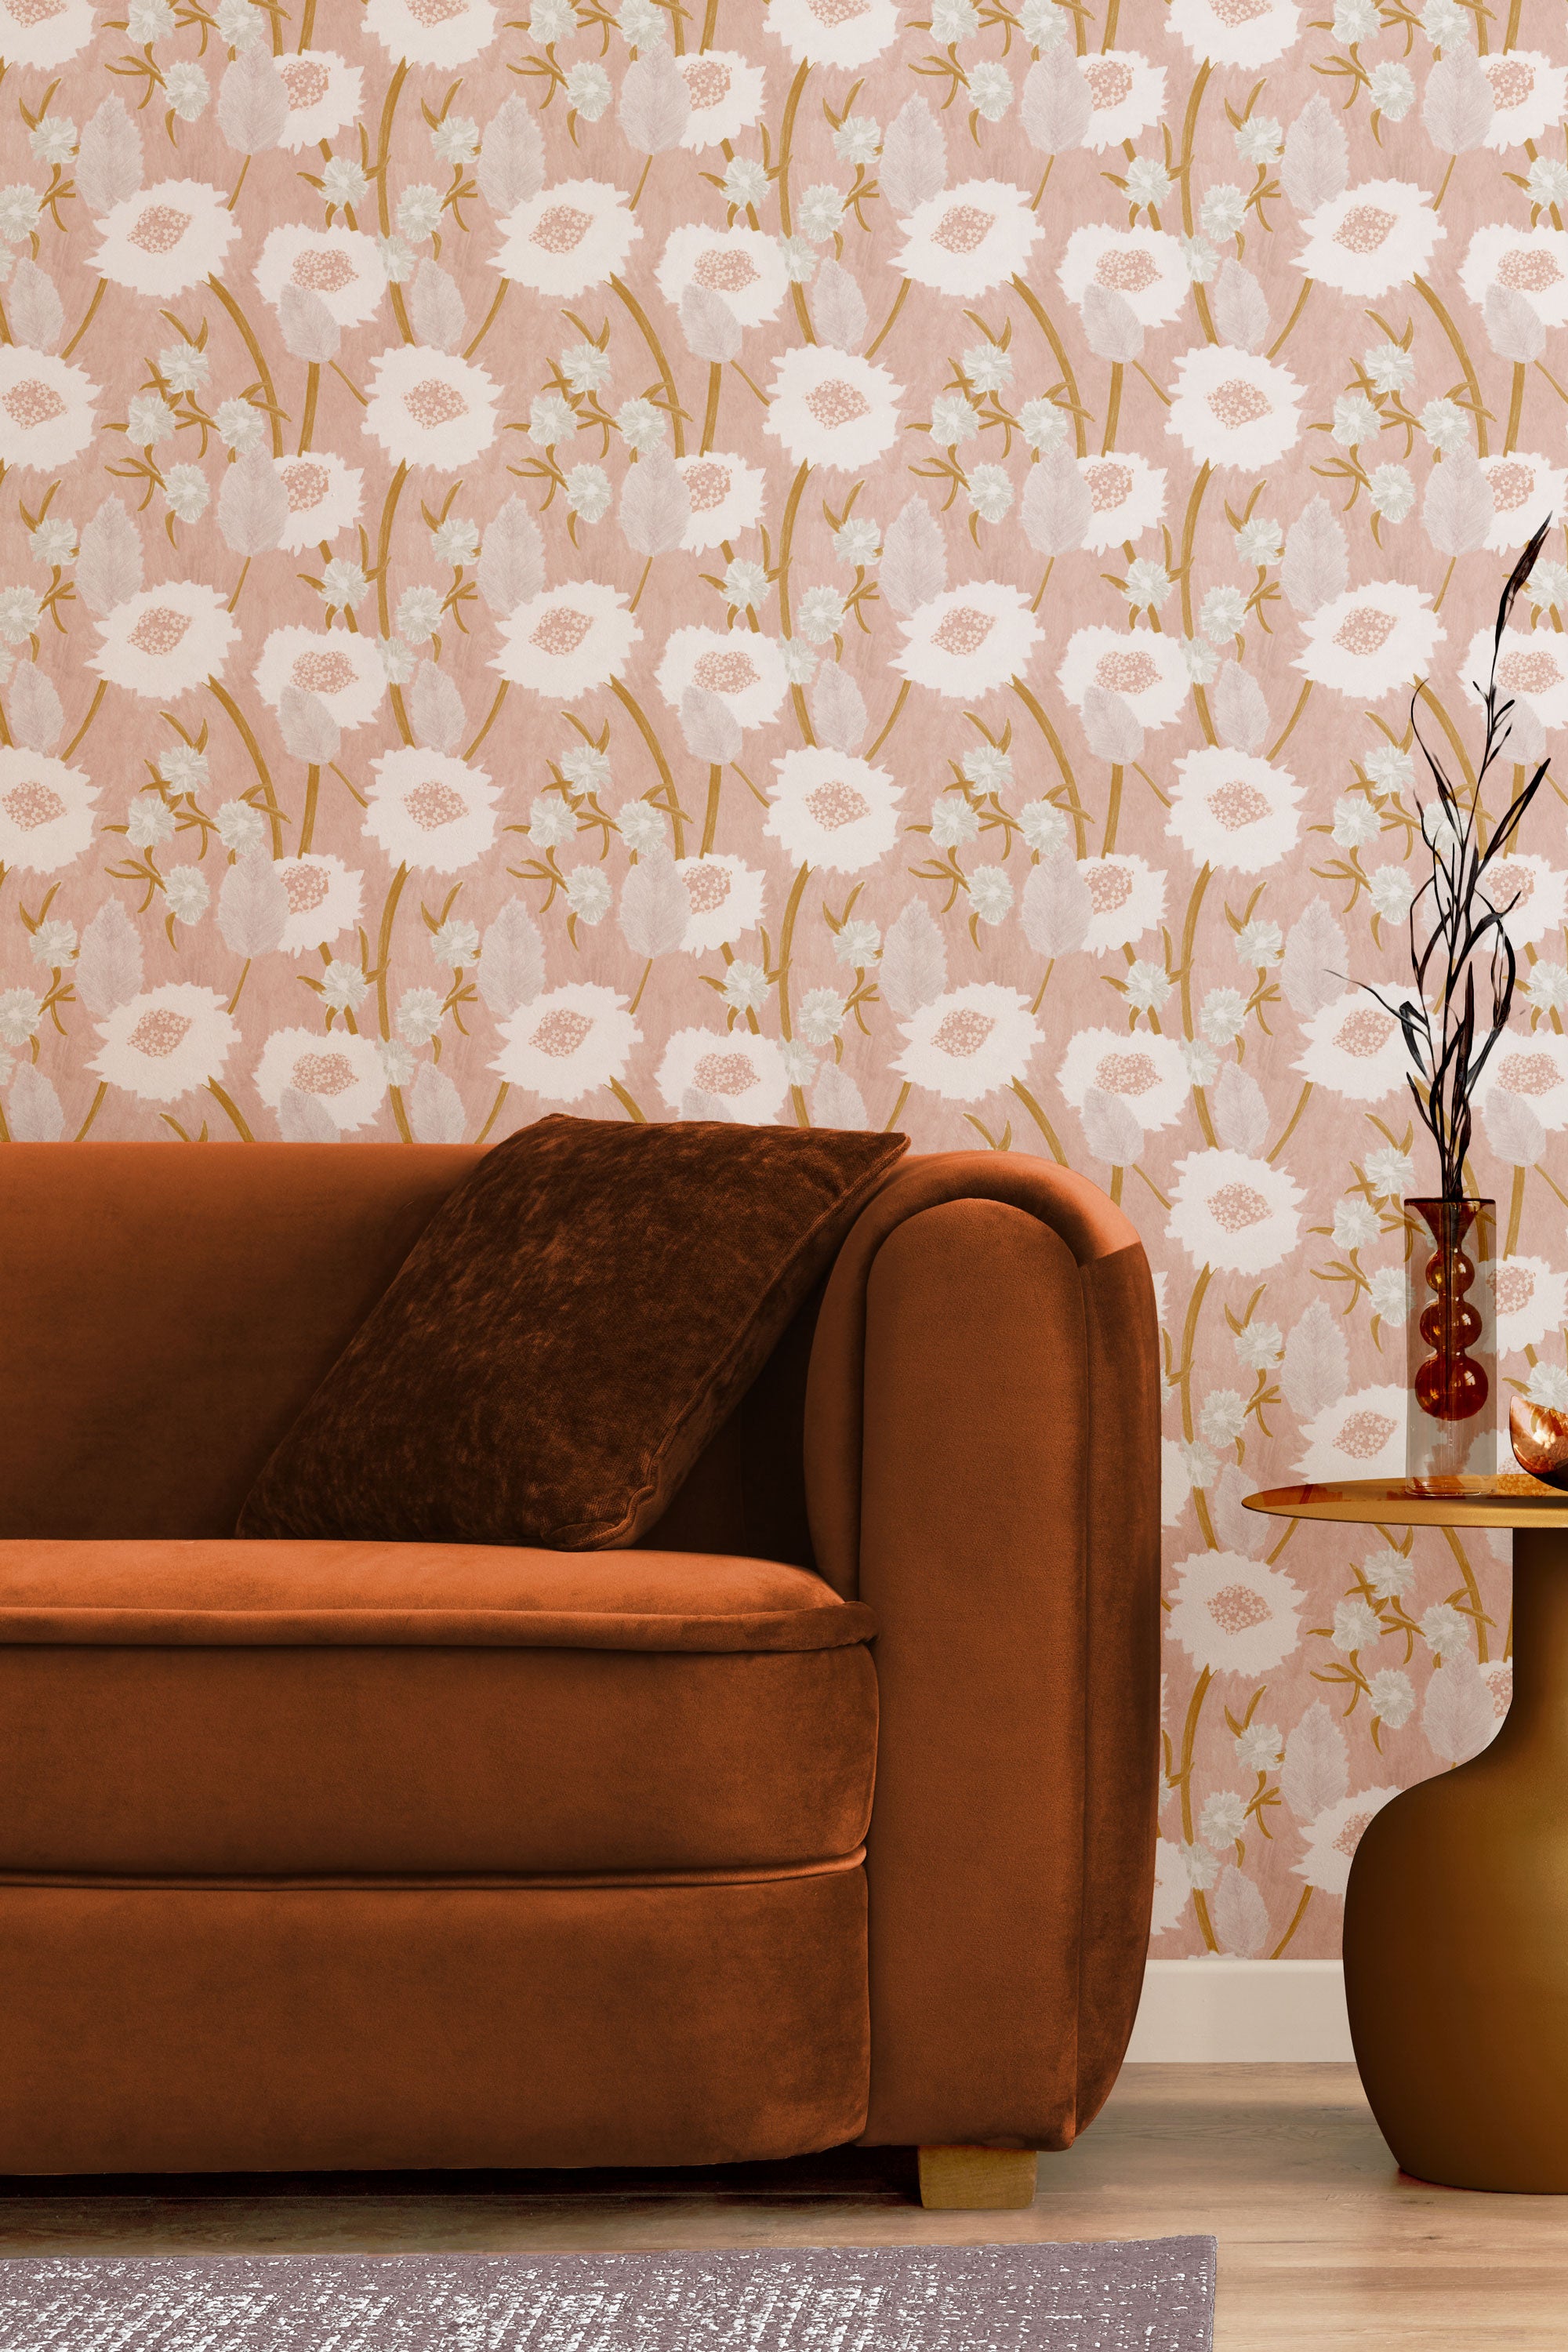 A couch and end table stand in front of a wall papered in a playful floral print in pink, white and tan.